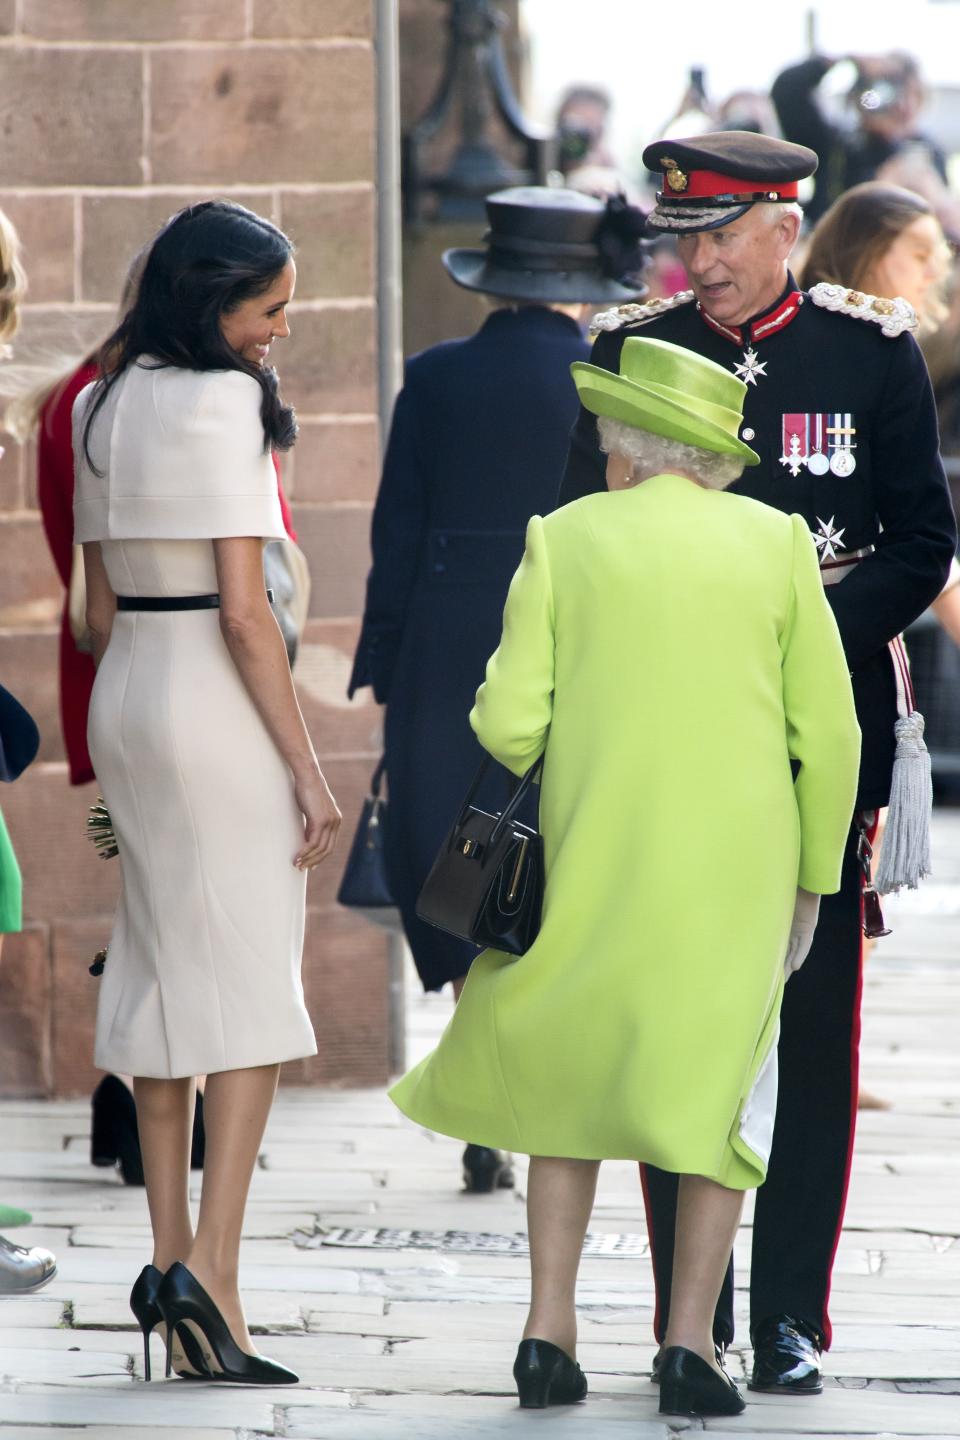 CHESTER, ENGLAND - JUNE 14:  Meghan, Duchess of Sussex and Queen Elizabeth II share a smile as they speak with the Lord Lieutenant as they leave Chester Town Hall on June 14, 2018 in Chester, England. Meghan Markle married Prince Harry last month to become Meghan, Duchess of Sussex.  This is her first engagement with the Queen. During the visit the pair opened a road bridge in Widnes, visited The Storyhouse in Chester followed by the Town Hall.  (Photo by Anthony Devlin/Getty Images)